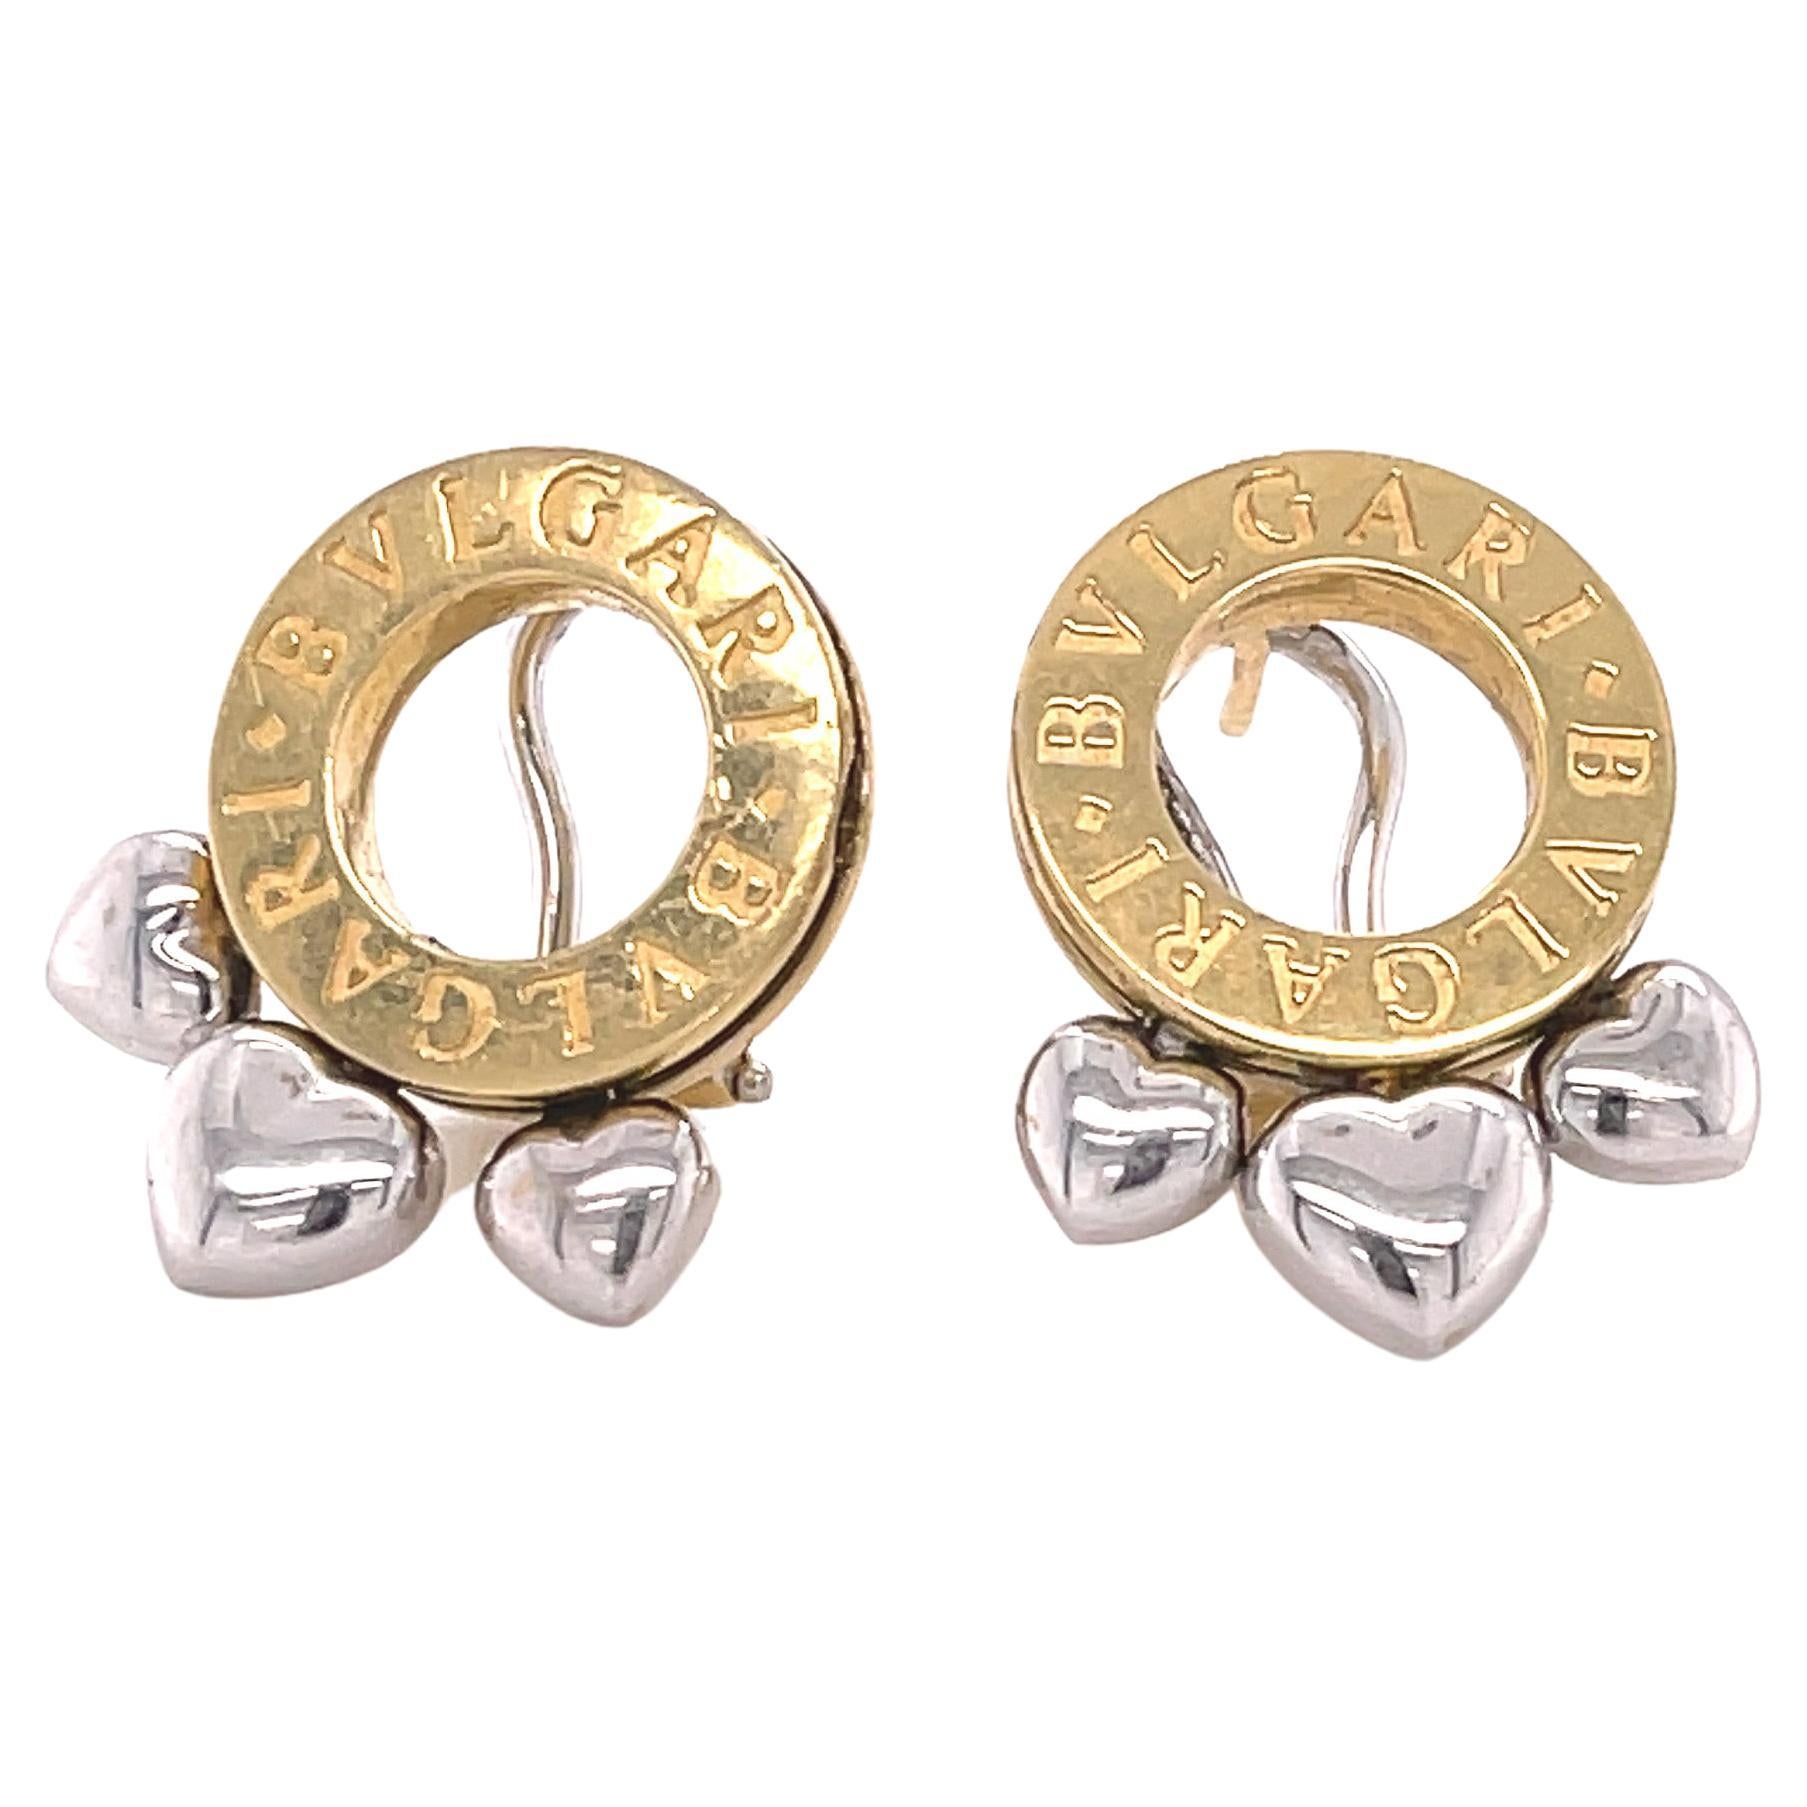 Unique Gold Bvlgari Moving Heart Earrings